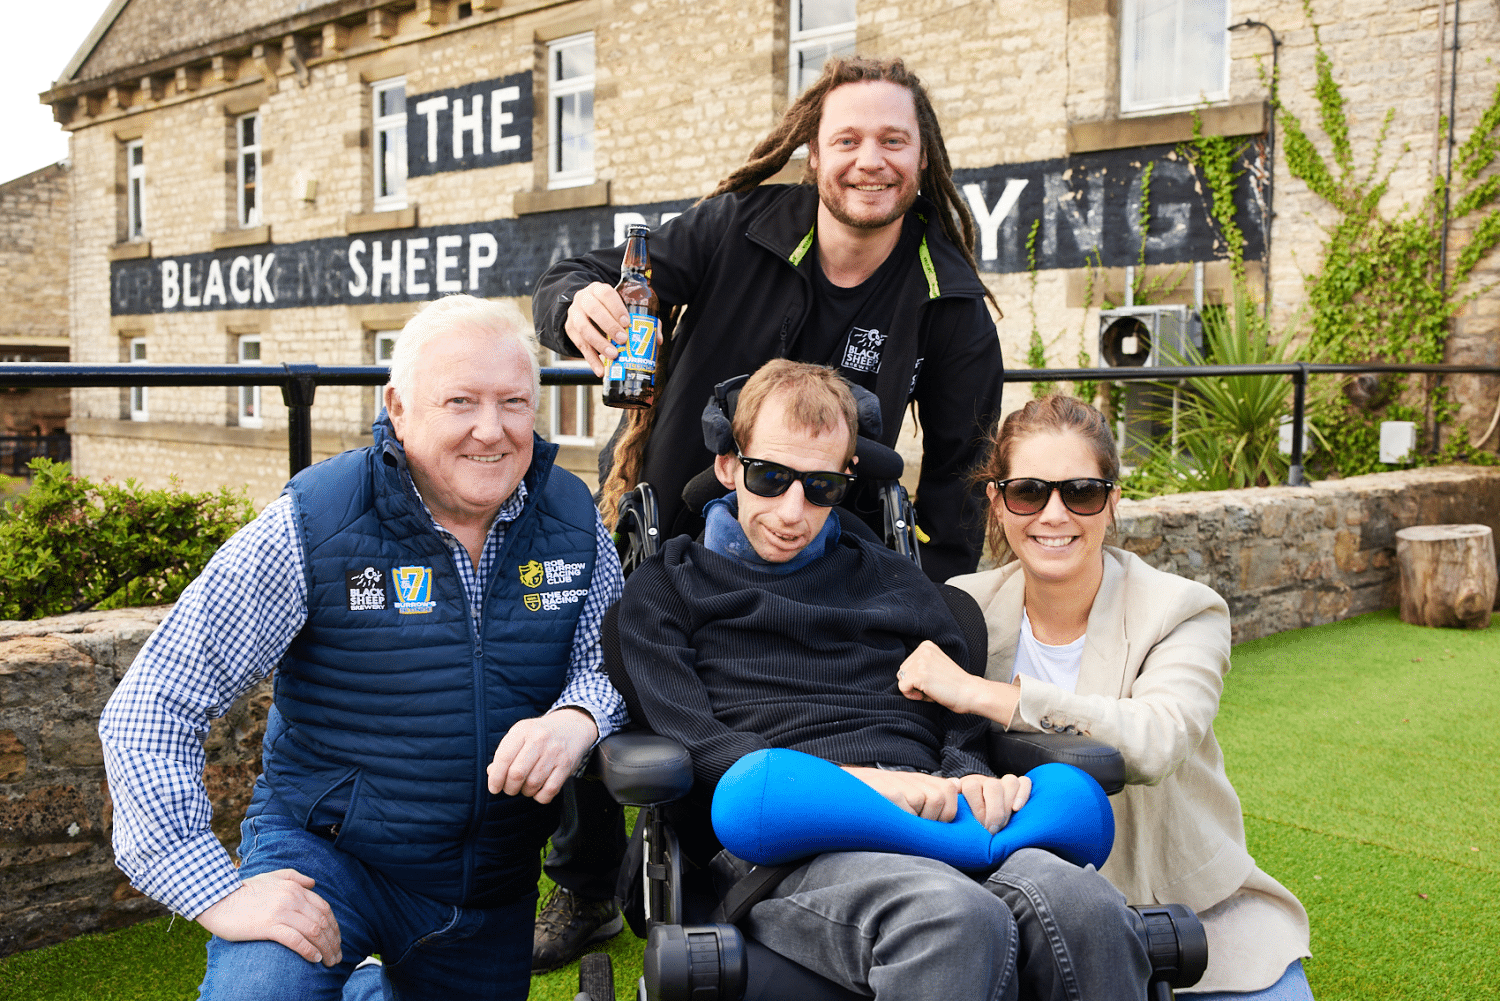 Launching Black Sheep’s New Beer in Support of Rob Burrow